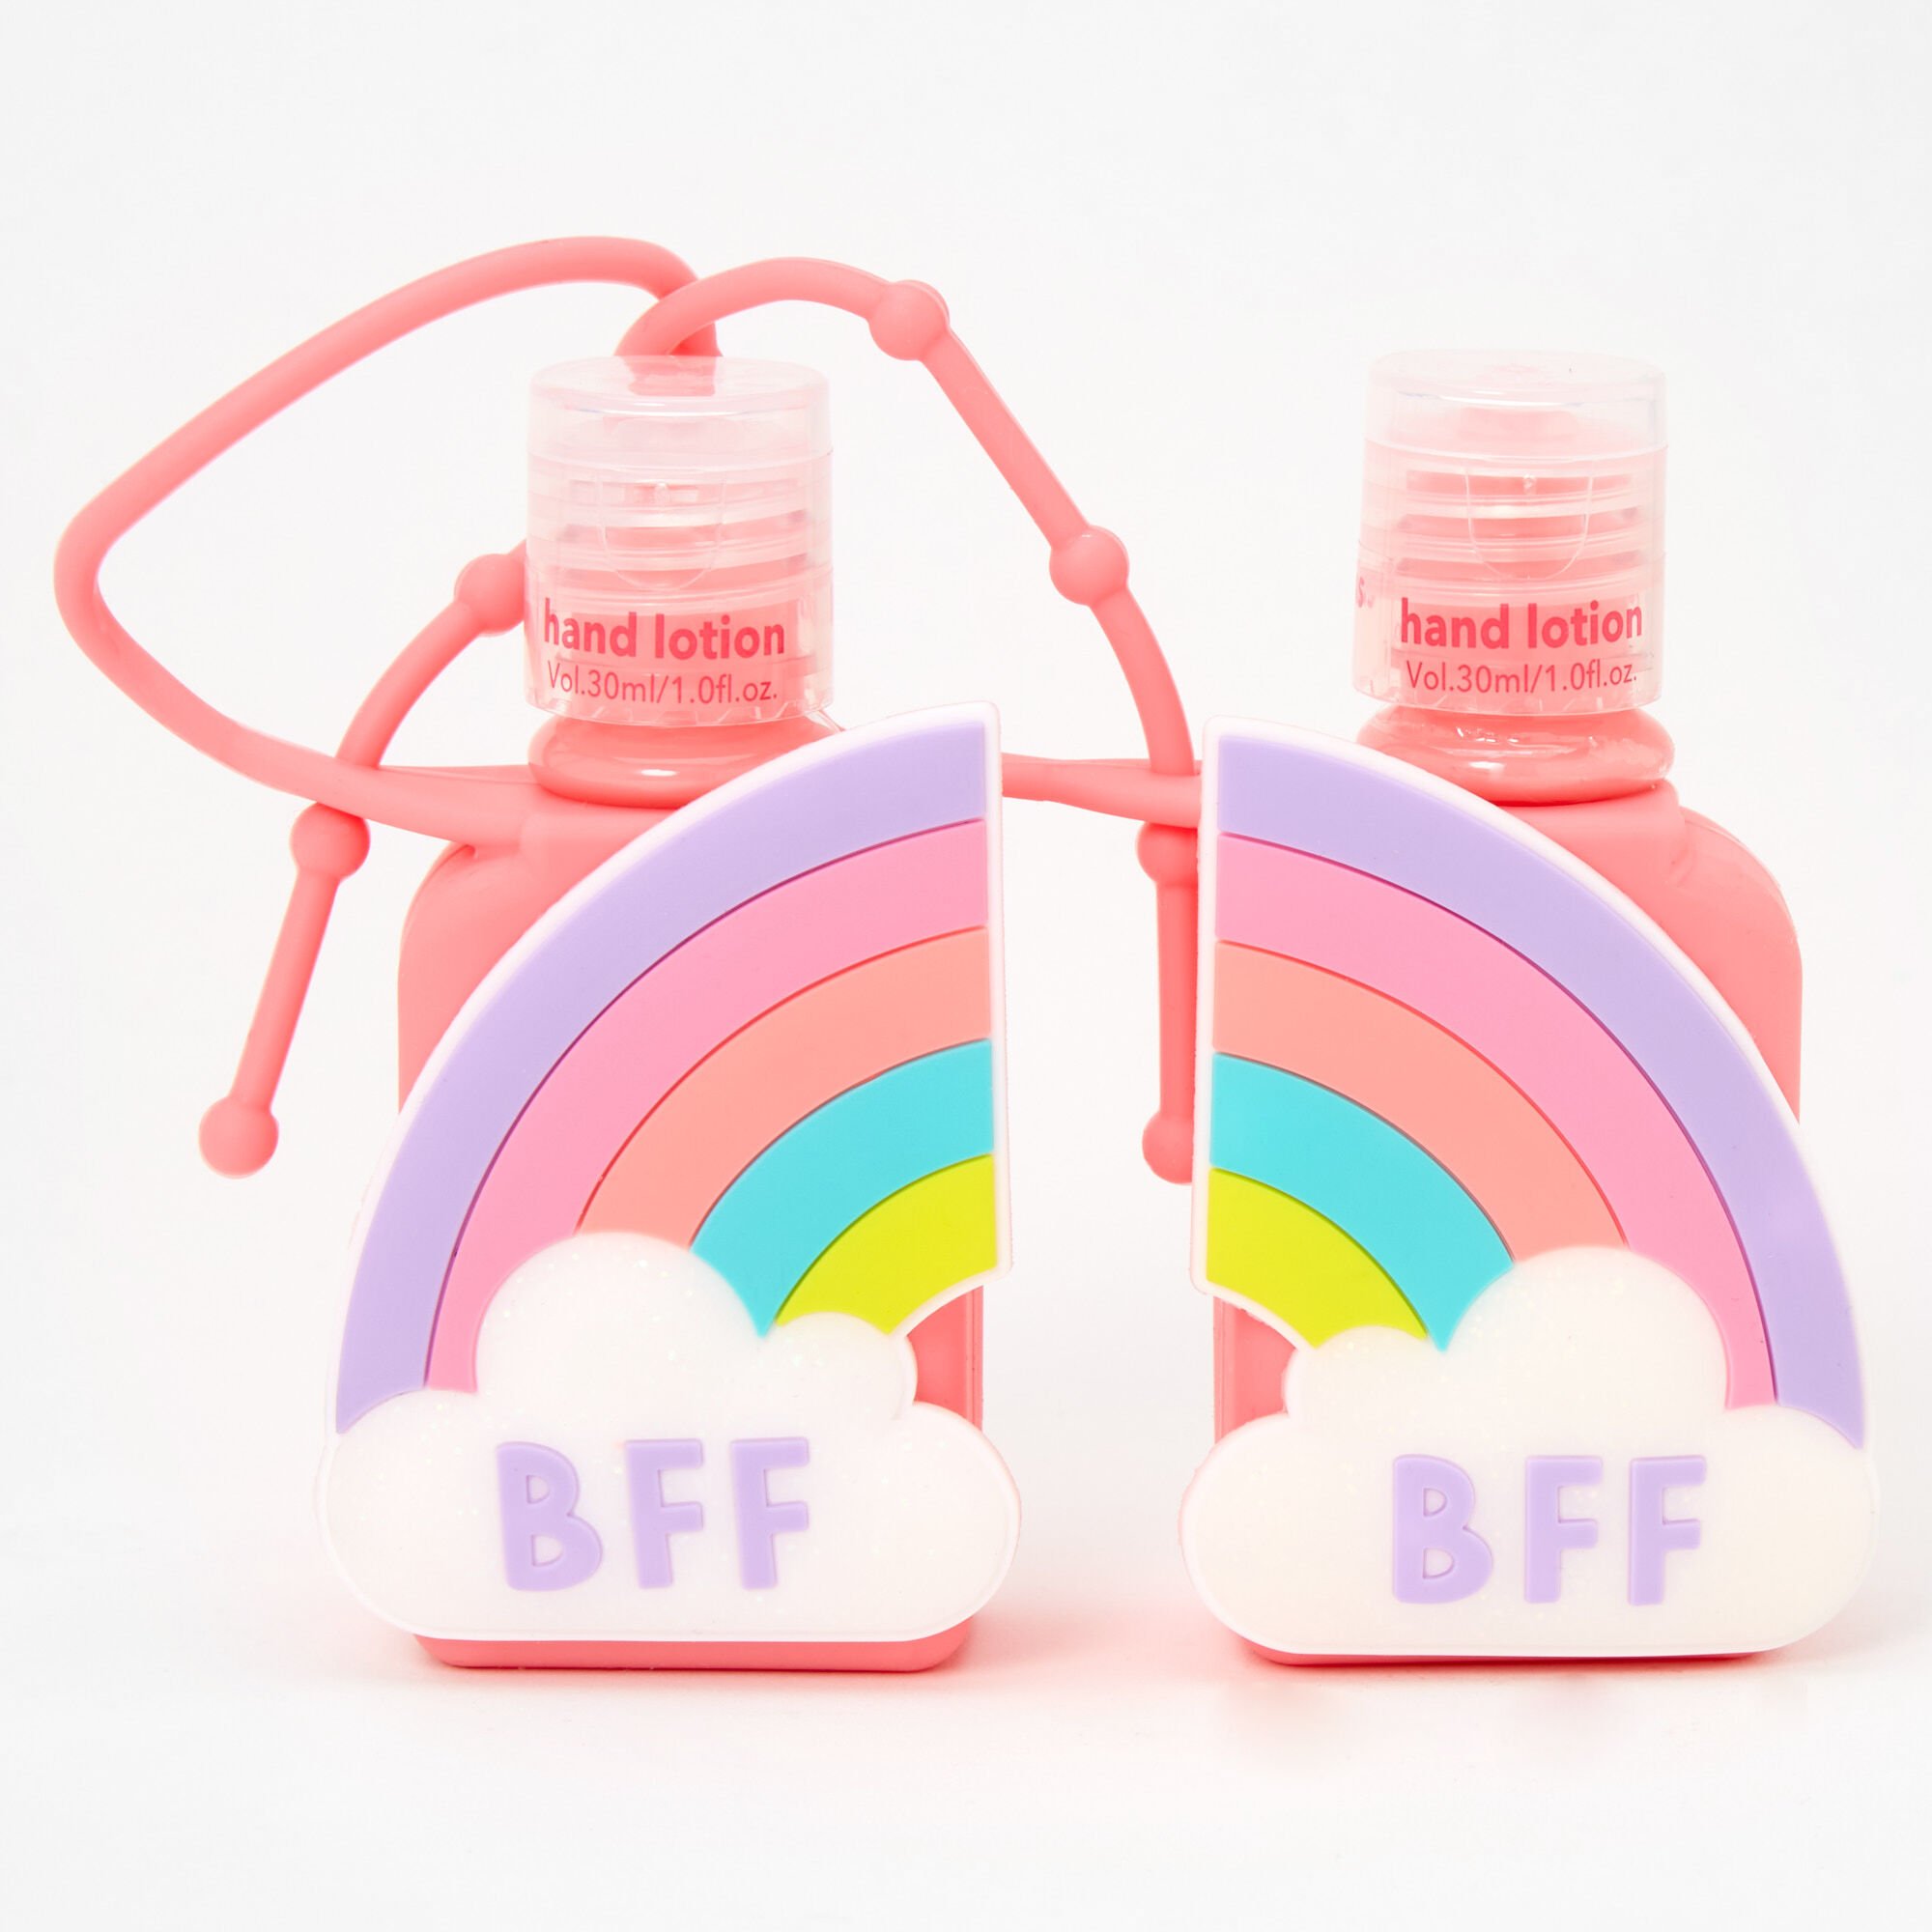 View Claires Bff Rainbow Hand Lotion 2 Pack Pink information